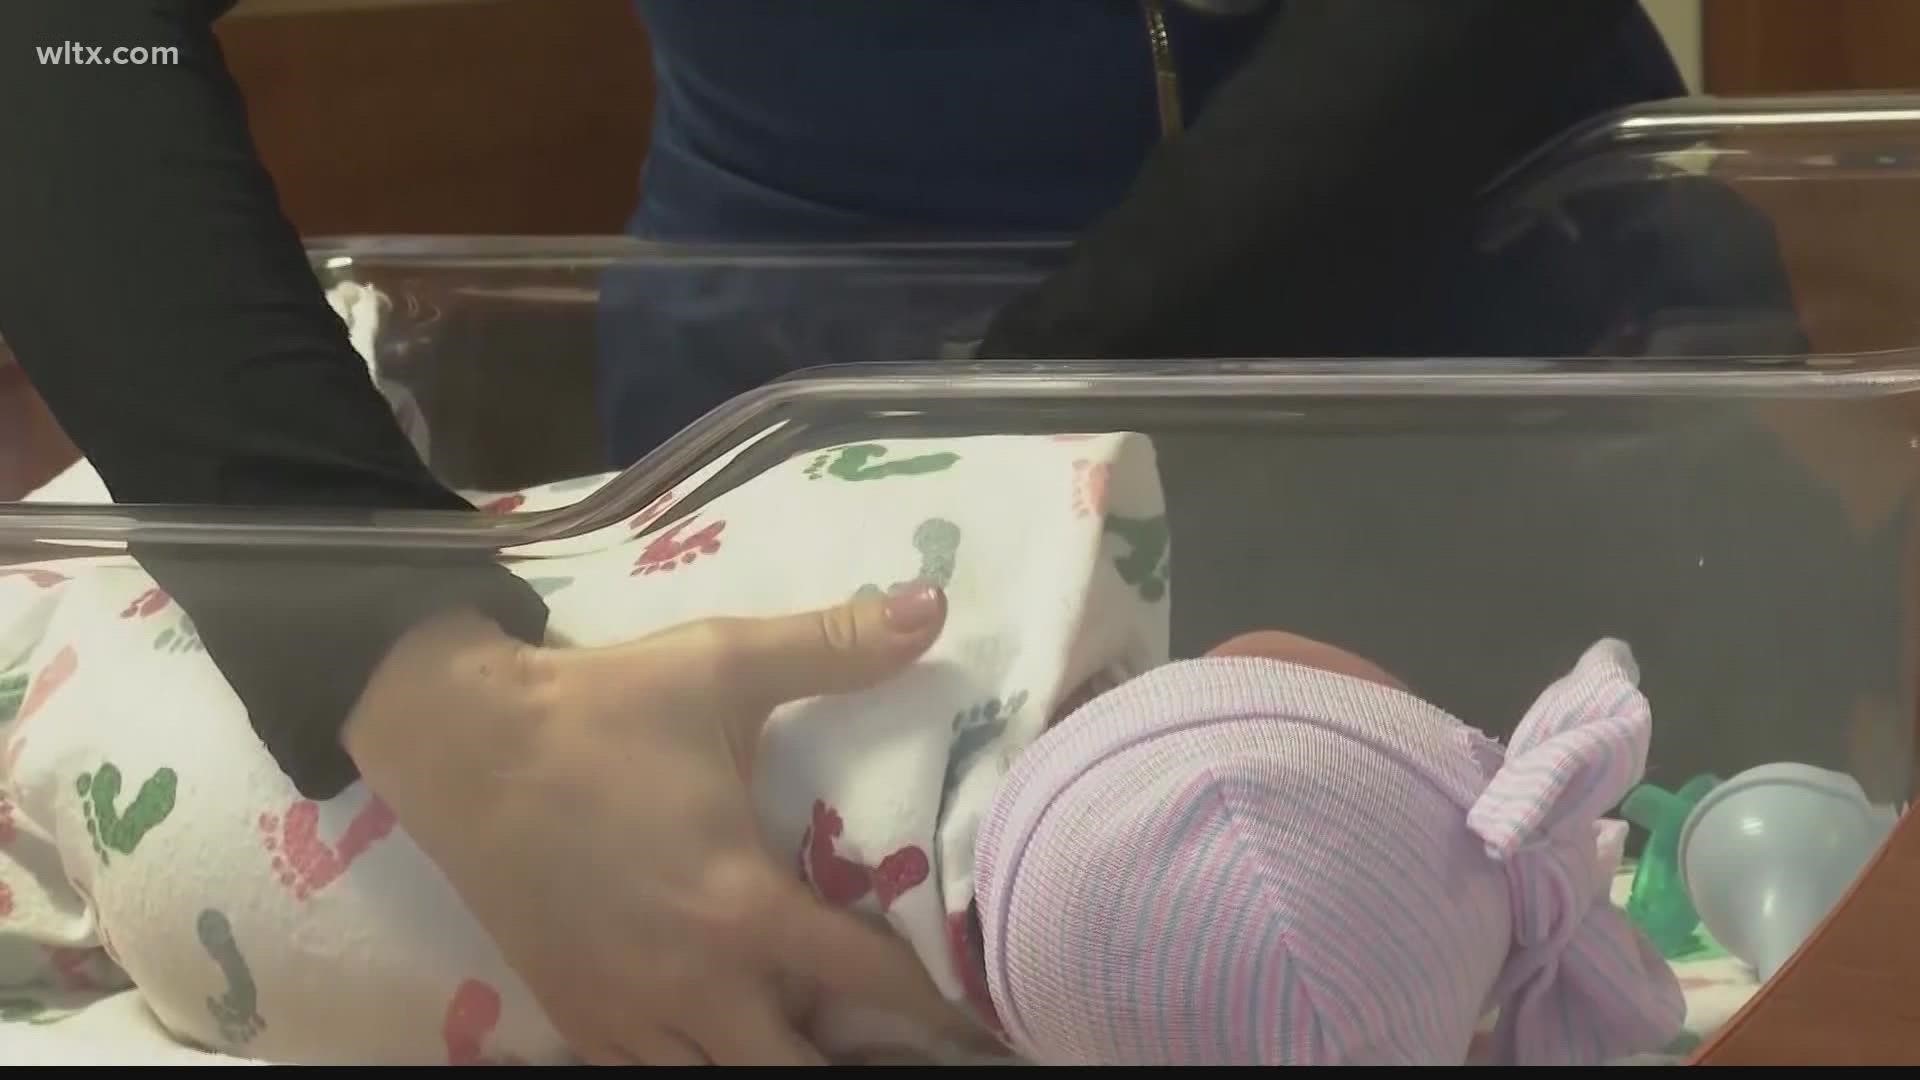 A hospital in South Carolina reports safely receiving an infant surrendered under Daniel's Law, or the Safe Haven for Abandoned Babies Act, on Thursday.